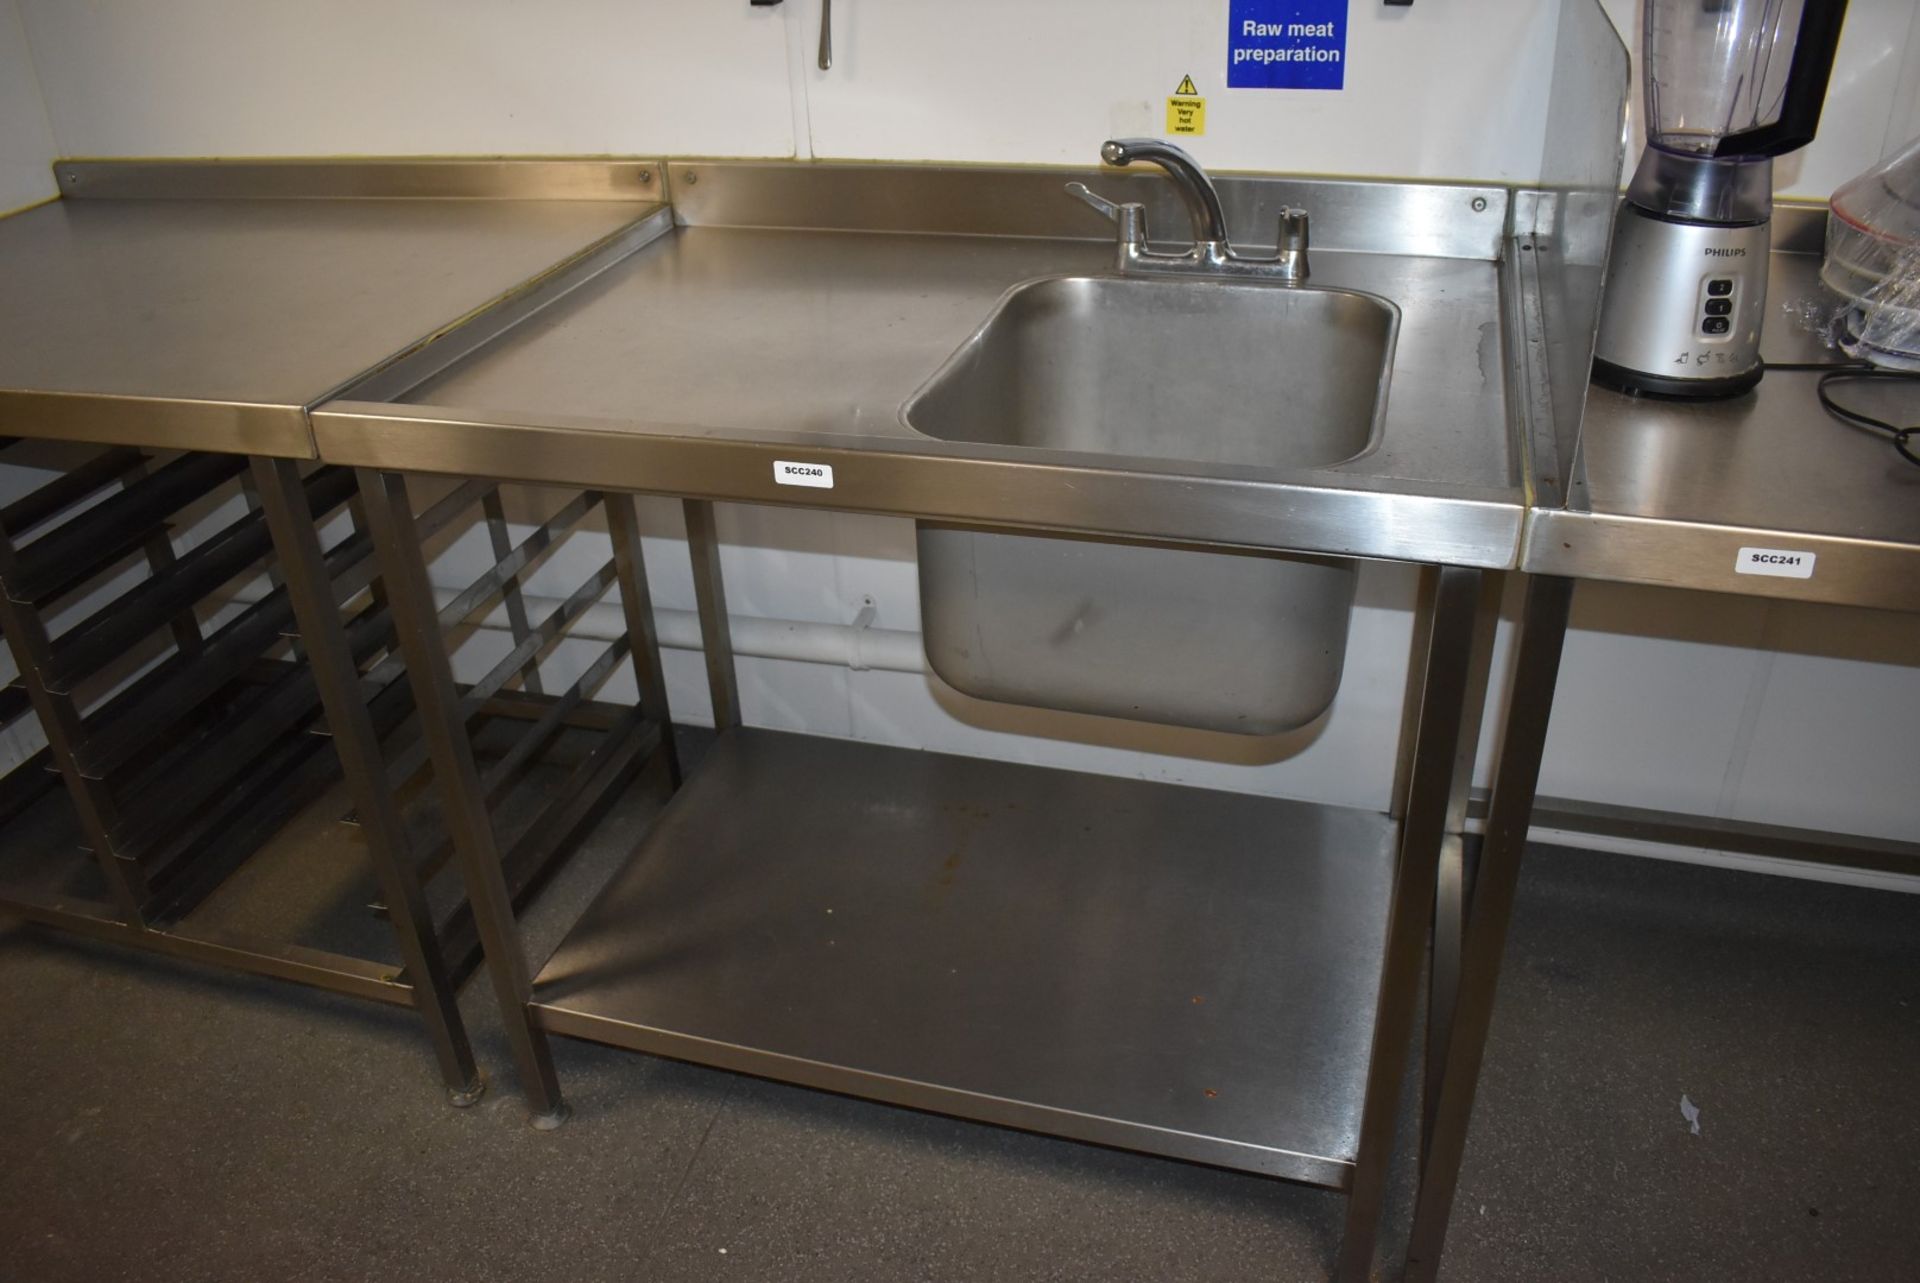 1 x Commercial Wash Unit With Large Sink Bowl, Mixer Tap, Undershelf, Upstand and Anti Spill Surface - Image 5 of 6